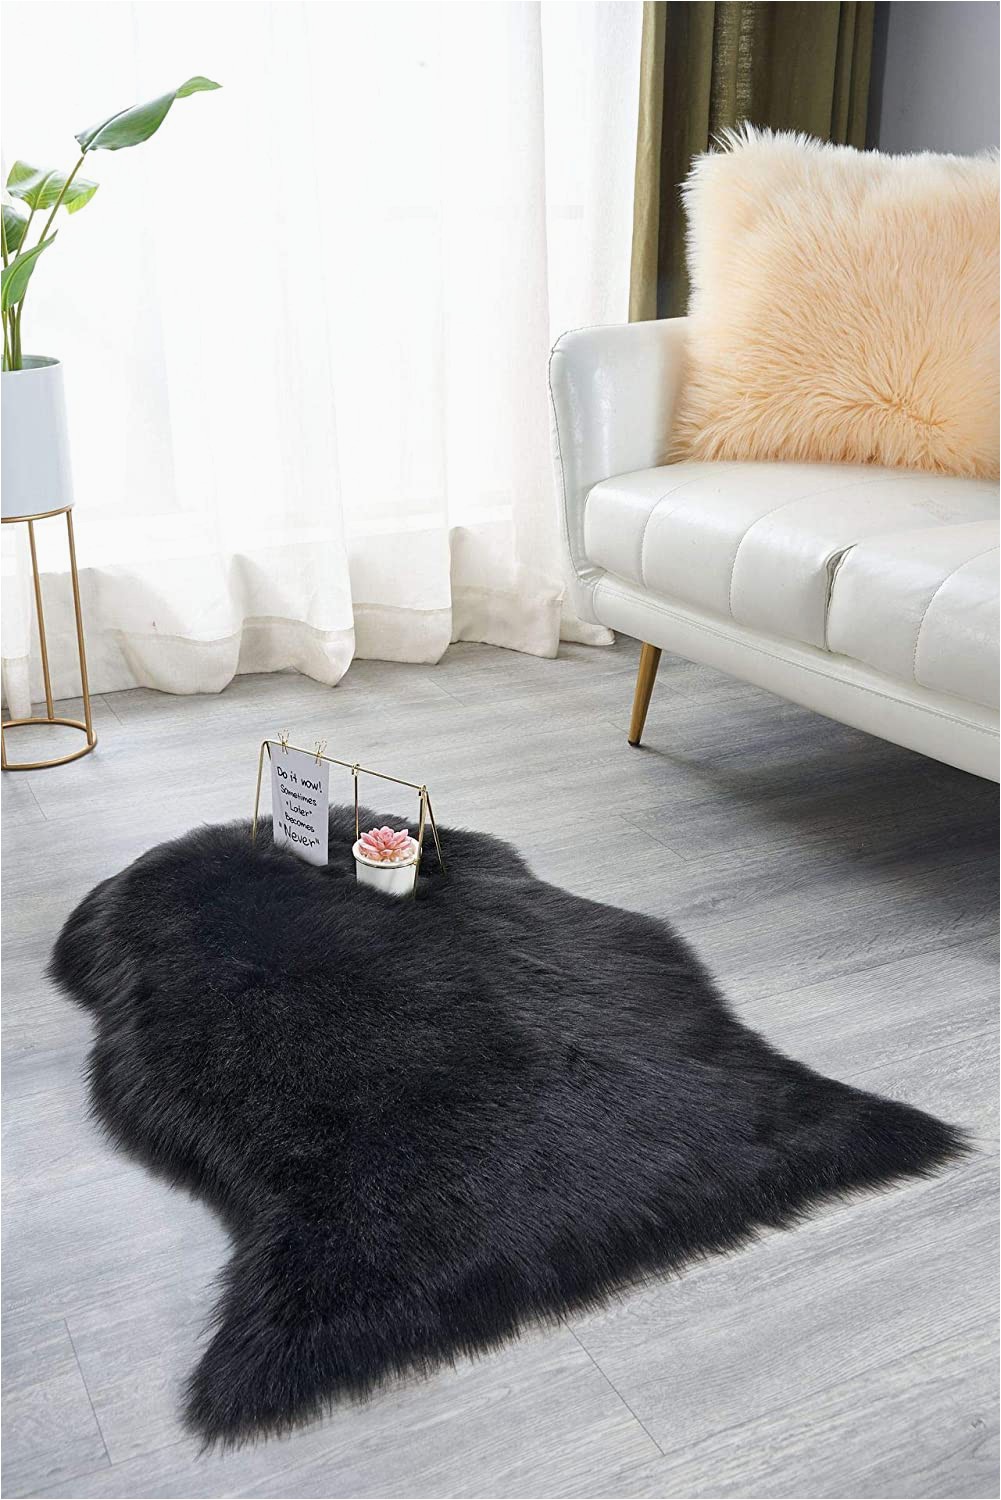 Black Fuzzy Bathroom Rug Super soft Faux Sheepskin Rug Plush Thick Fuzzy sofa Couch Seat Cushion Cover Fur Carpets for Living Room Bedside Mats solid Color Mondern Luxury